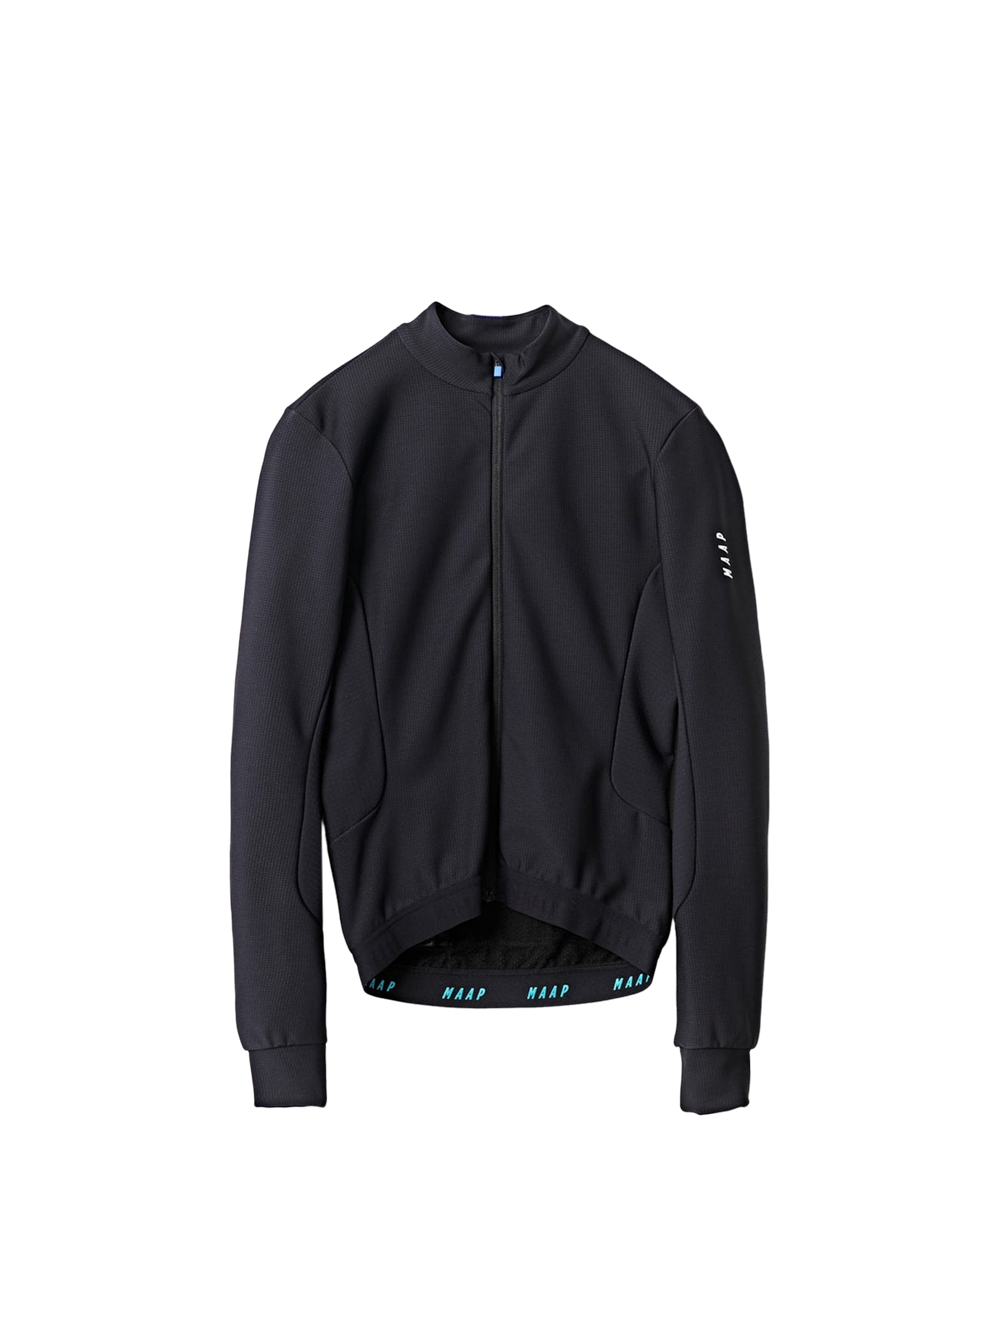 Product Image for Force Pro Winter LS Jersey